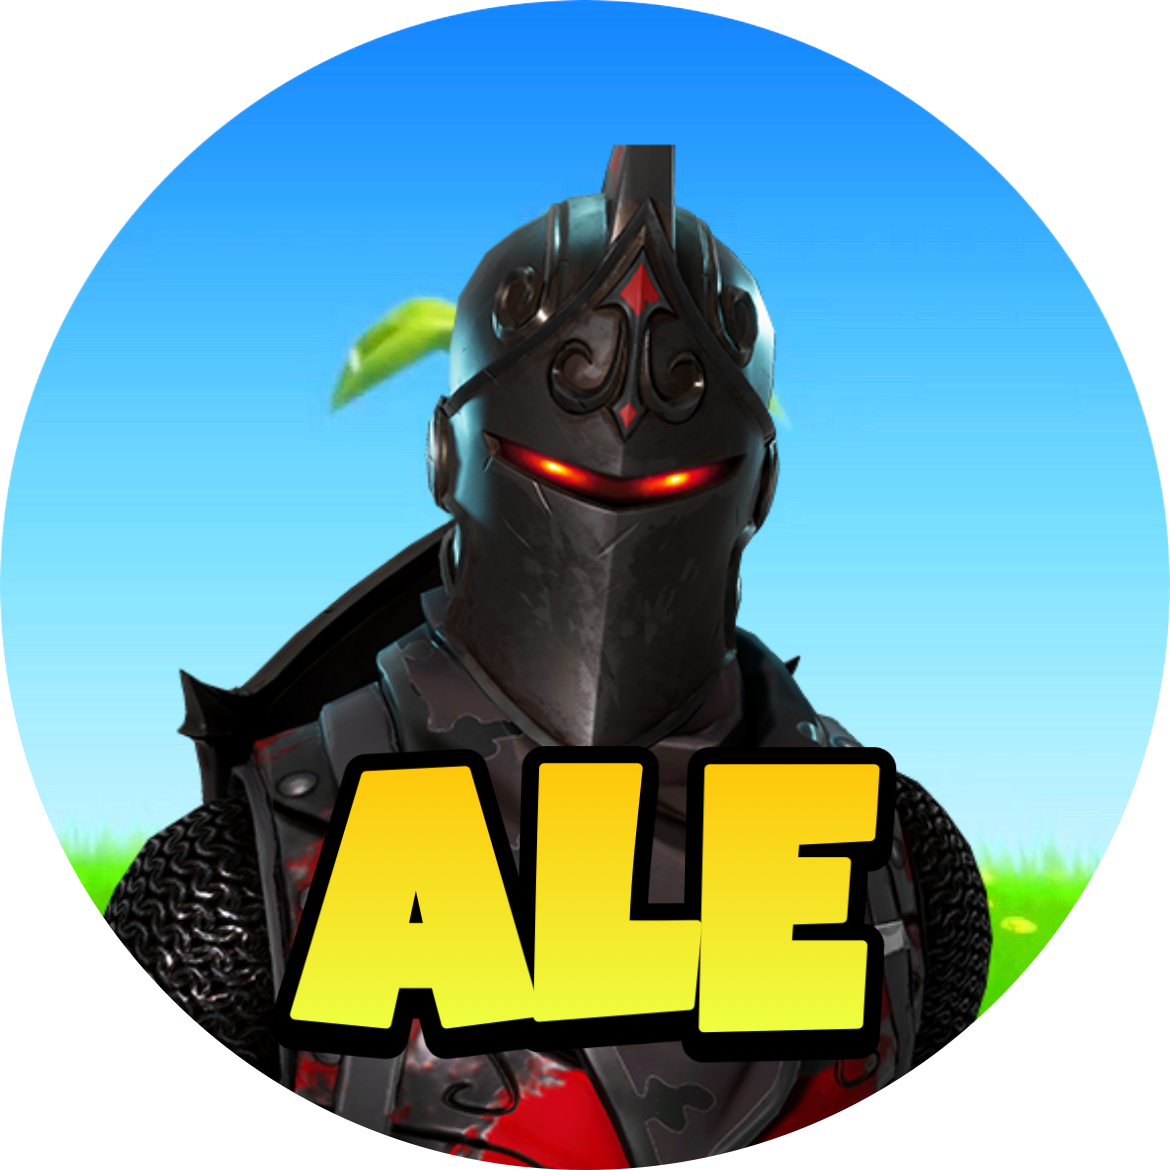 Ale_Pro_100's Profile Picture on PvPRP